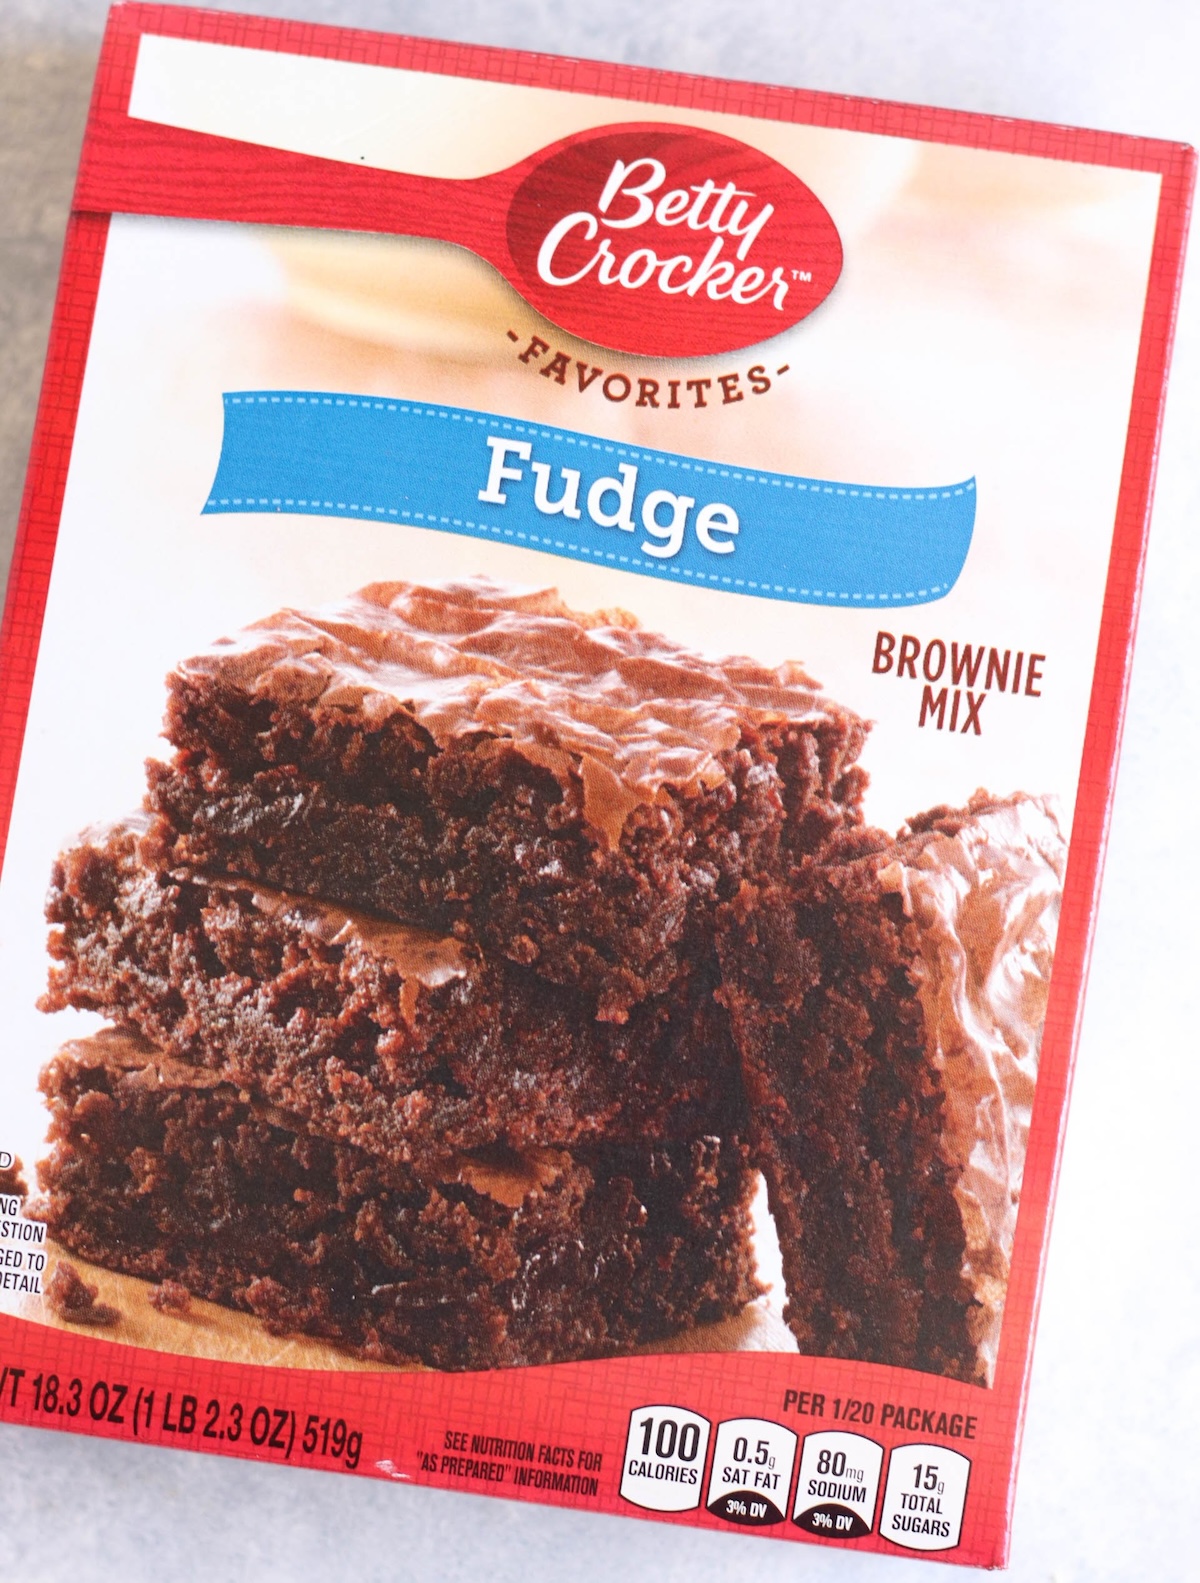 A box of Betty Crocker Fudge Brownie Mix, featuring an image of baked brownies and nutritional information on the front.